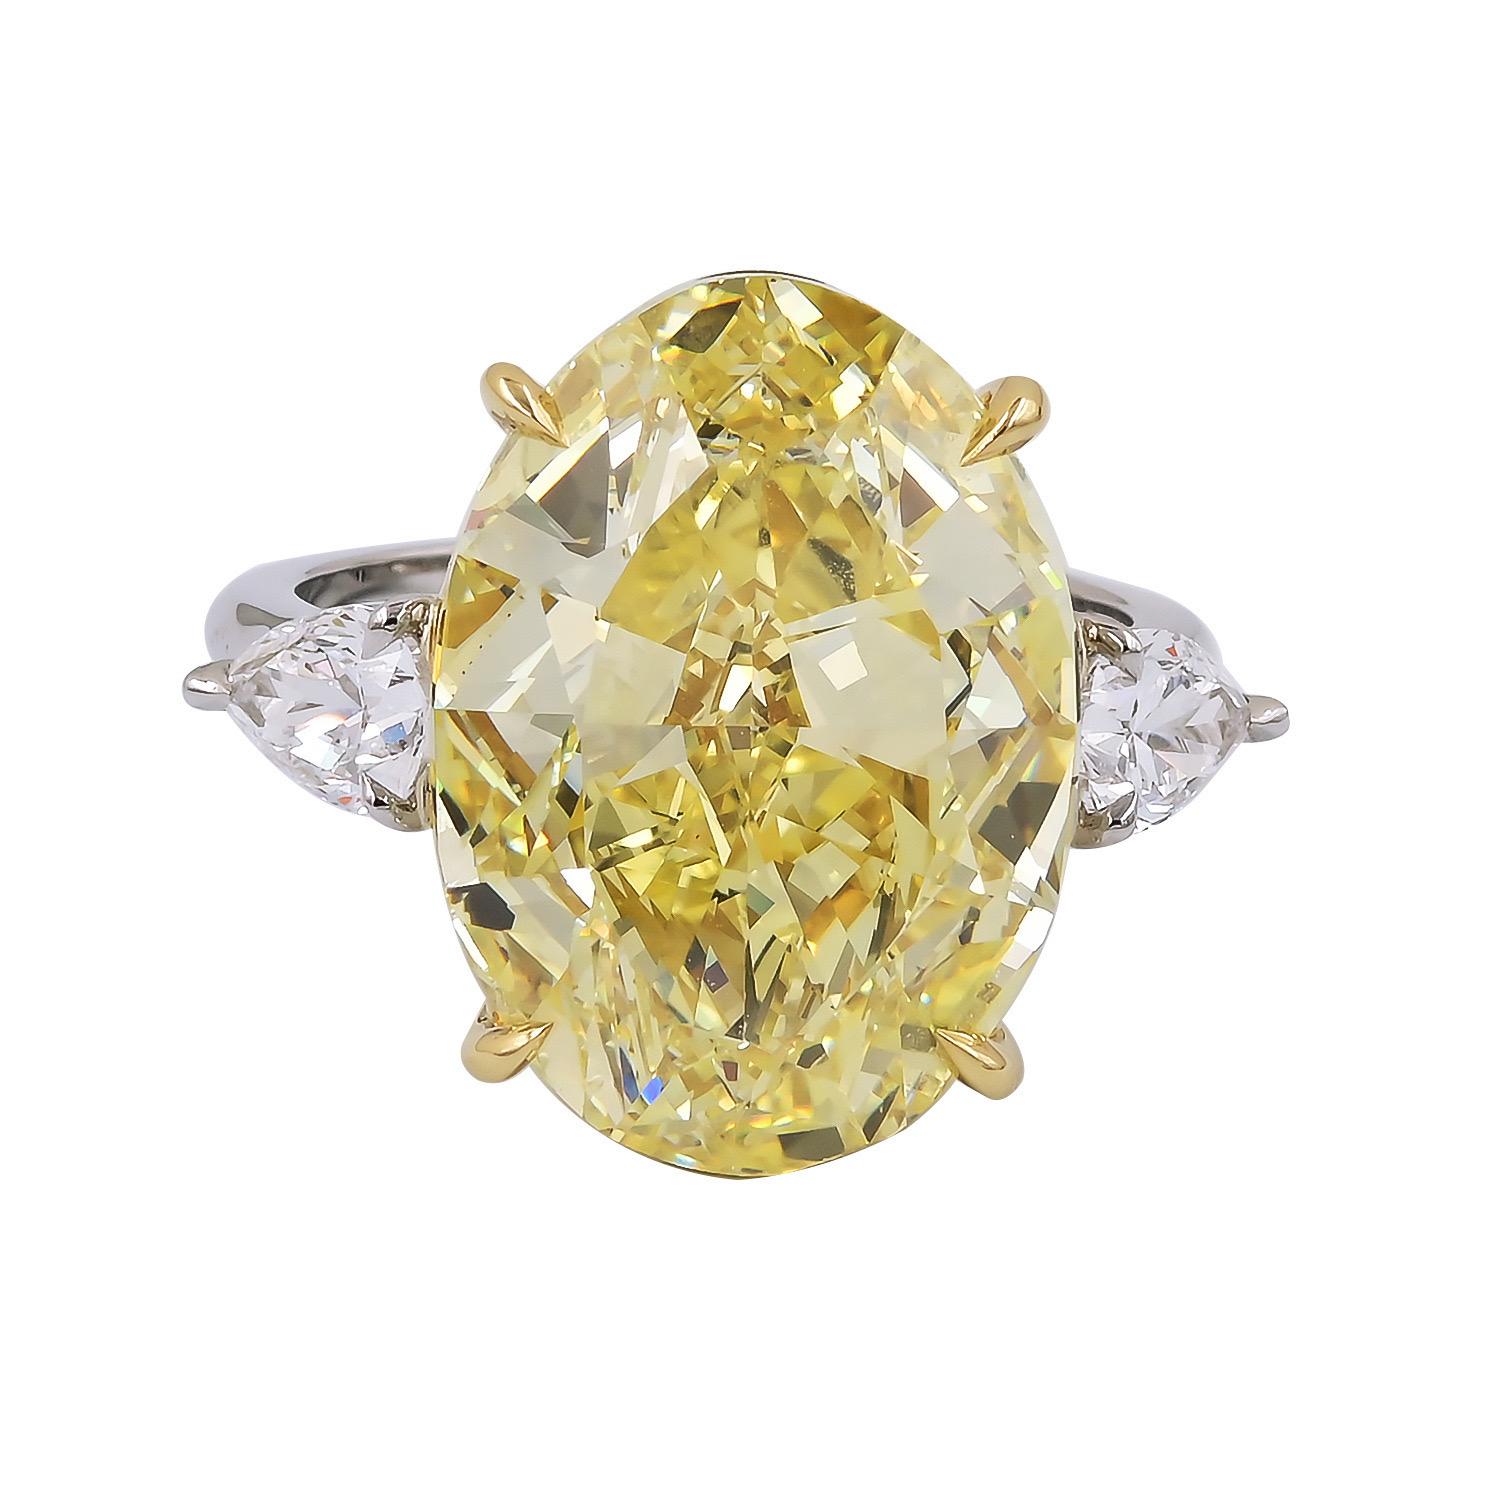 Natural Fancy Intense Yellow Diamond Ring .

A very rare and special 
Natural colored diamond ring .

This handcrafted platnium ring is set with an astonishing over TWELVE CARAT  natural INTENSE YELLOW Oval shaped Diamond .

Naturally colored